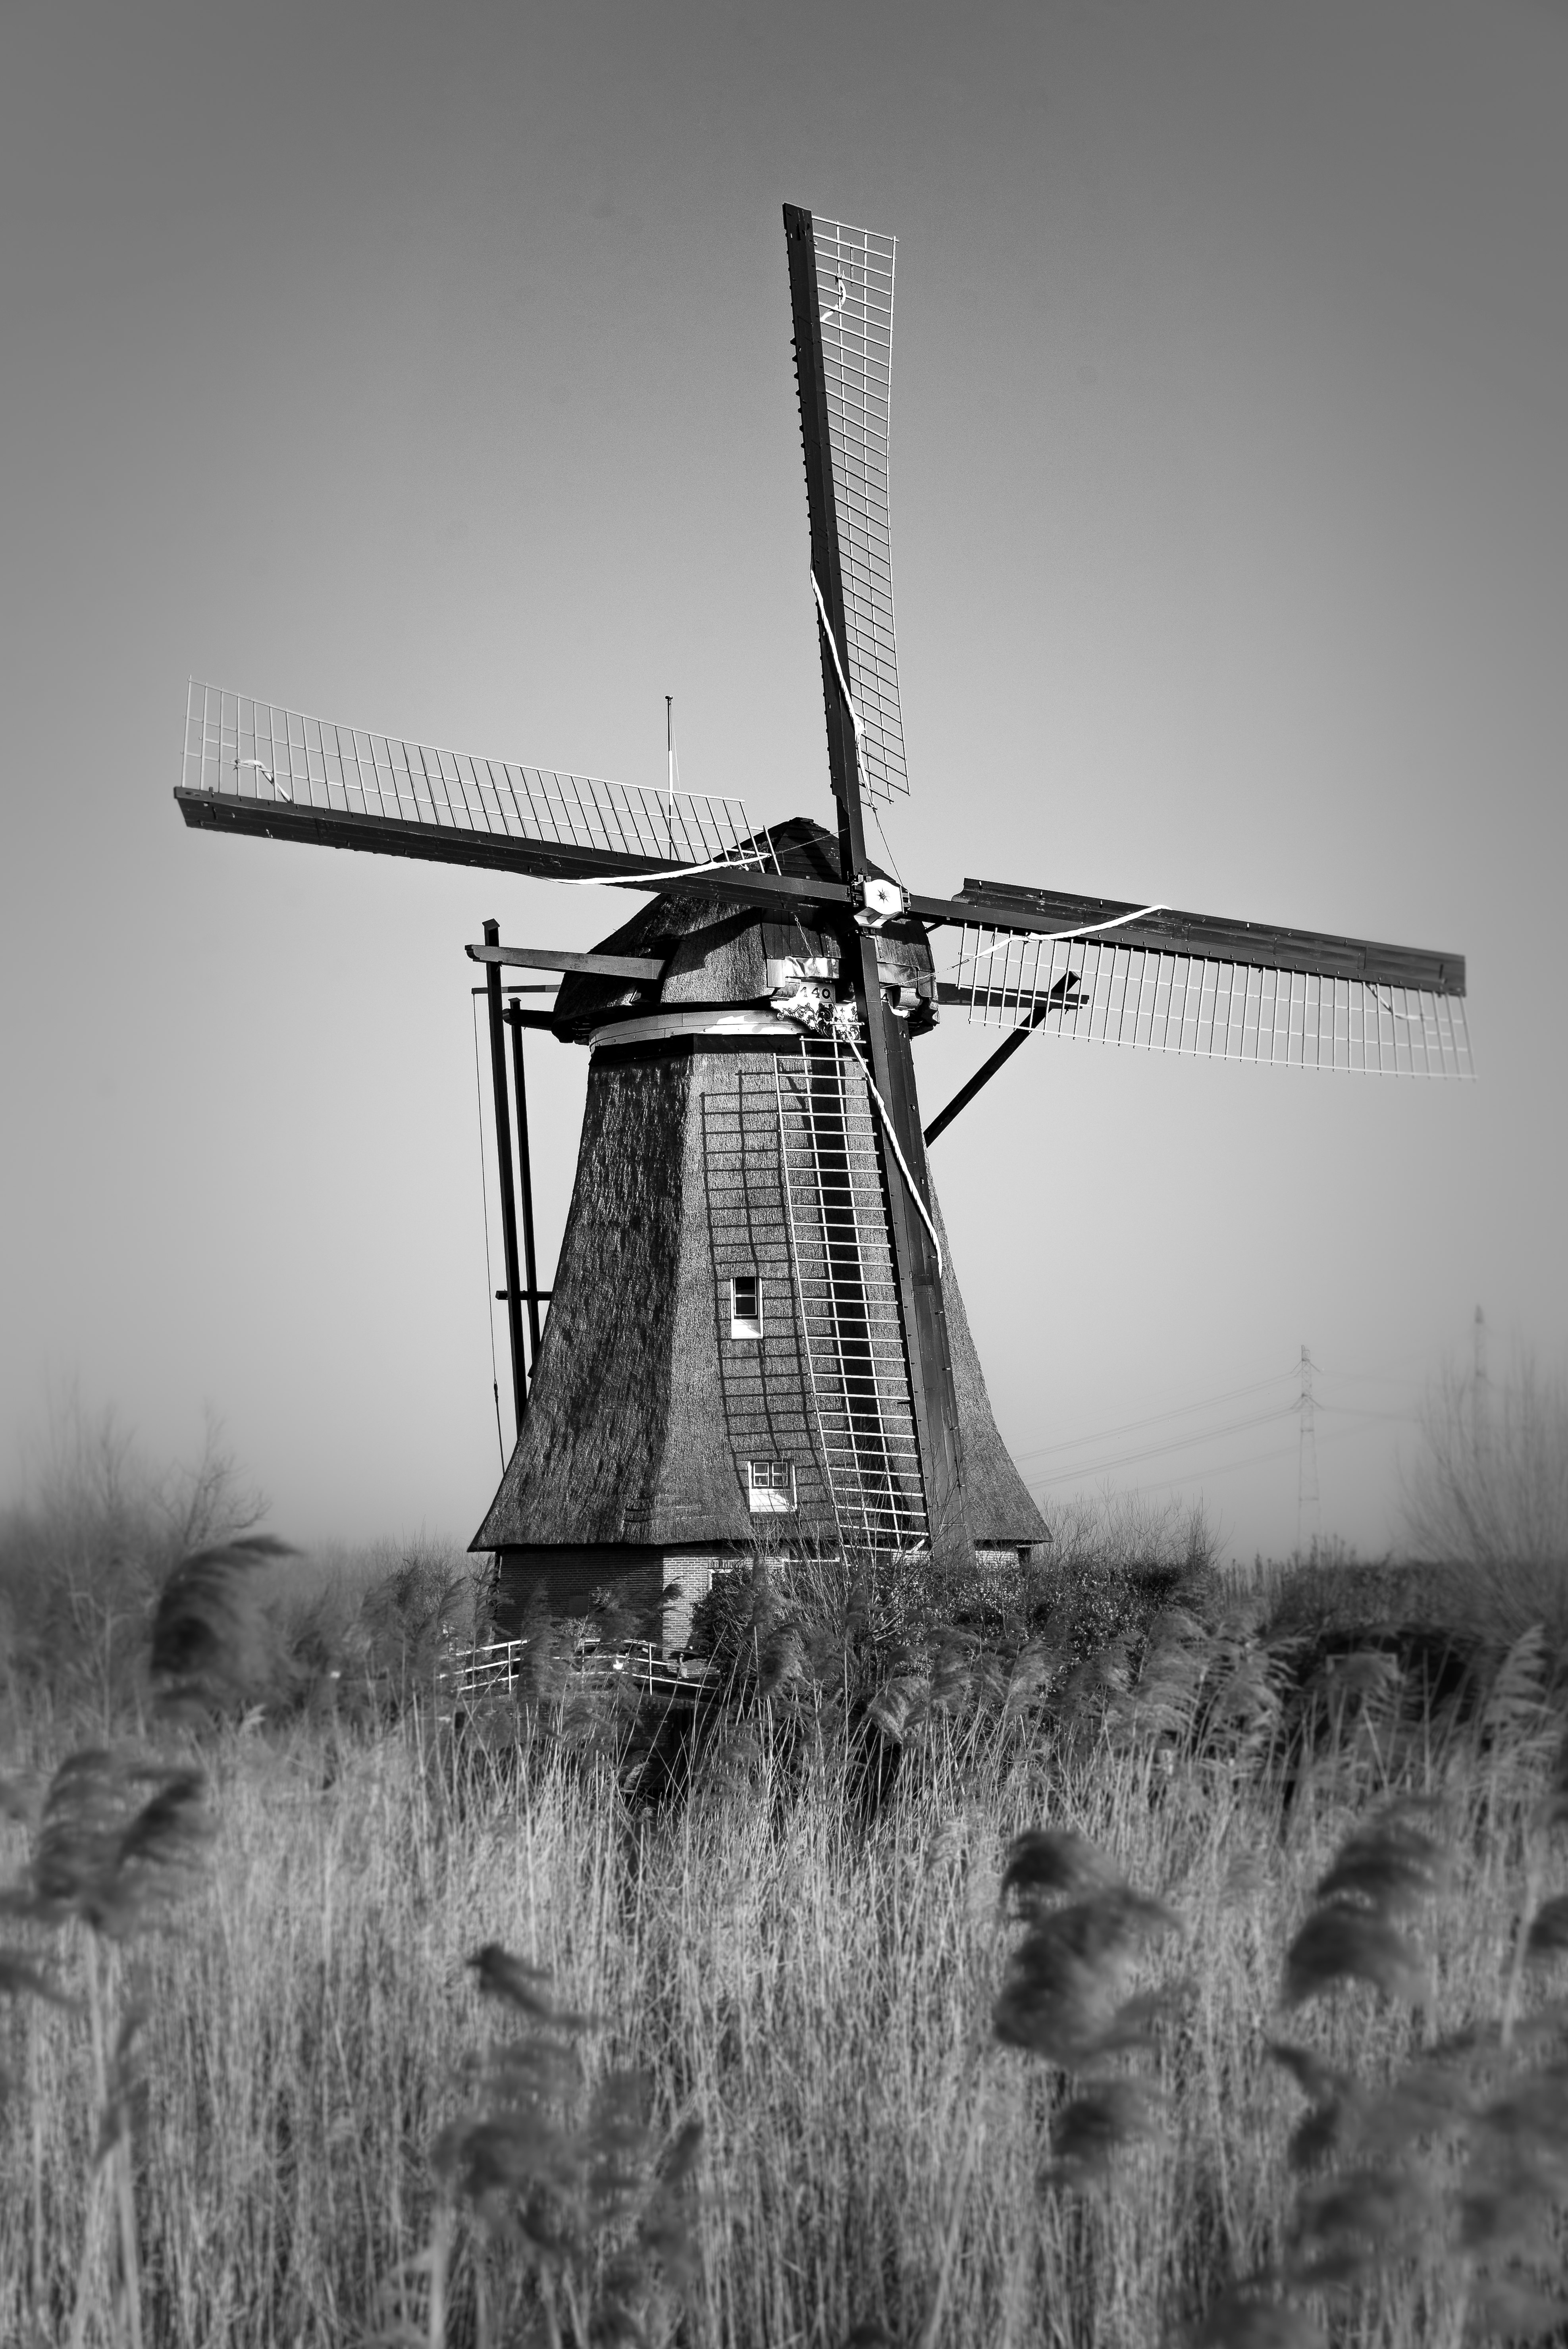 windmill in the middle of grass field